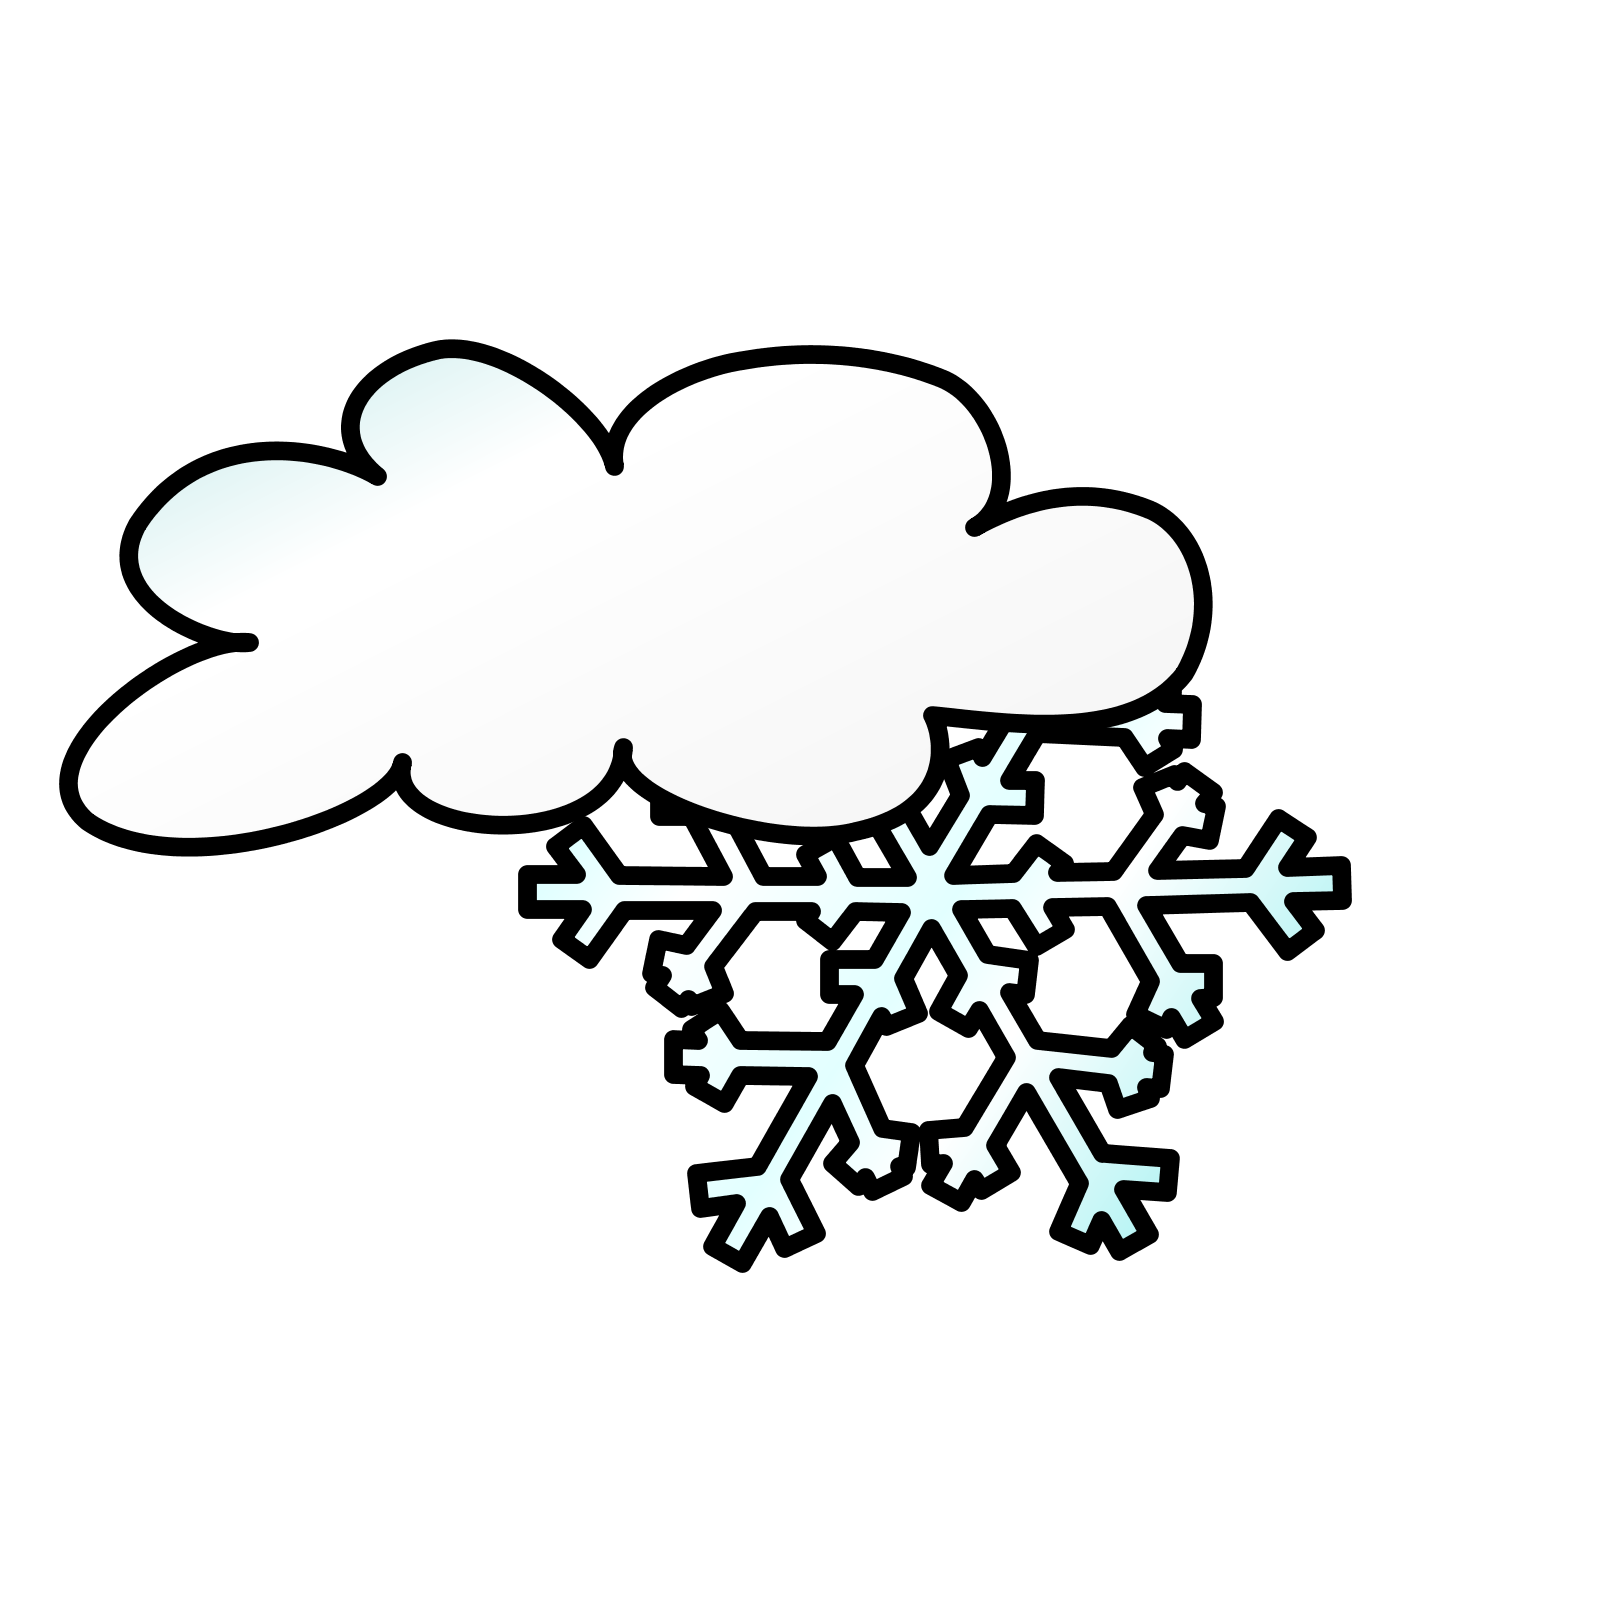 Clipart snowflake snowy. Weather panda free images